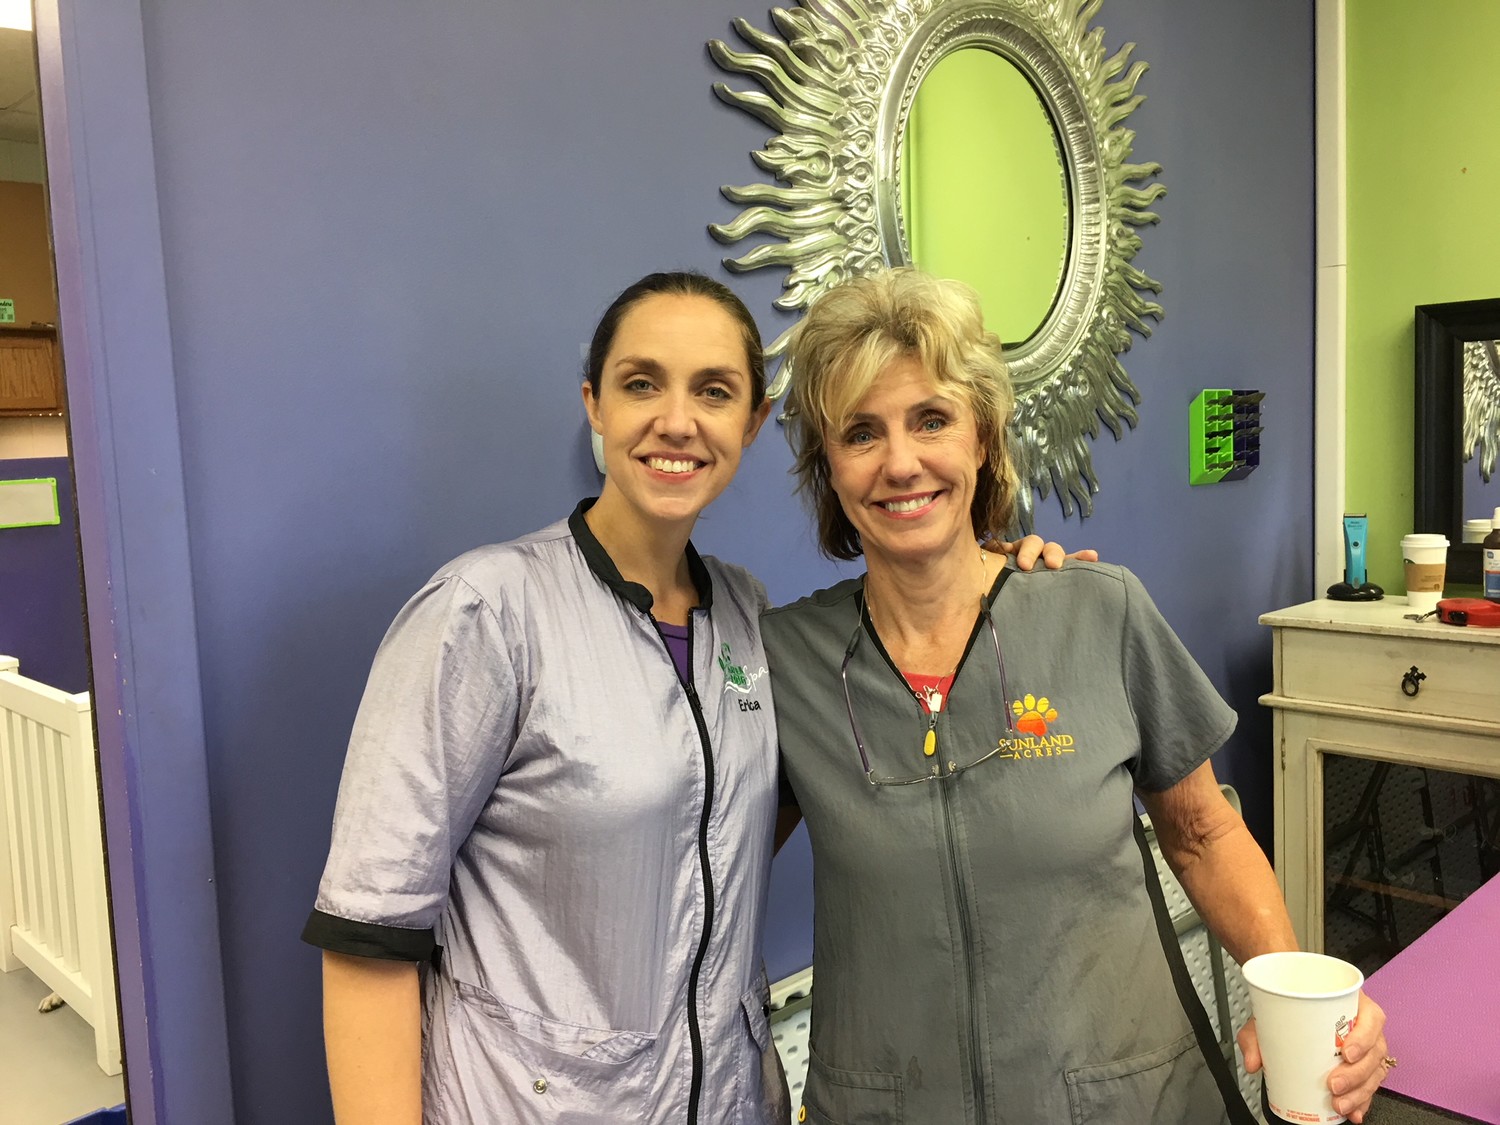 Green Dog Spa co-owners Erica Benson and Lynn Lamoureux recently hosted and sponsored a two-day workshop and certification event by the National Dog Groomers Association of America (NDGAA).